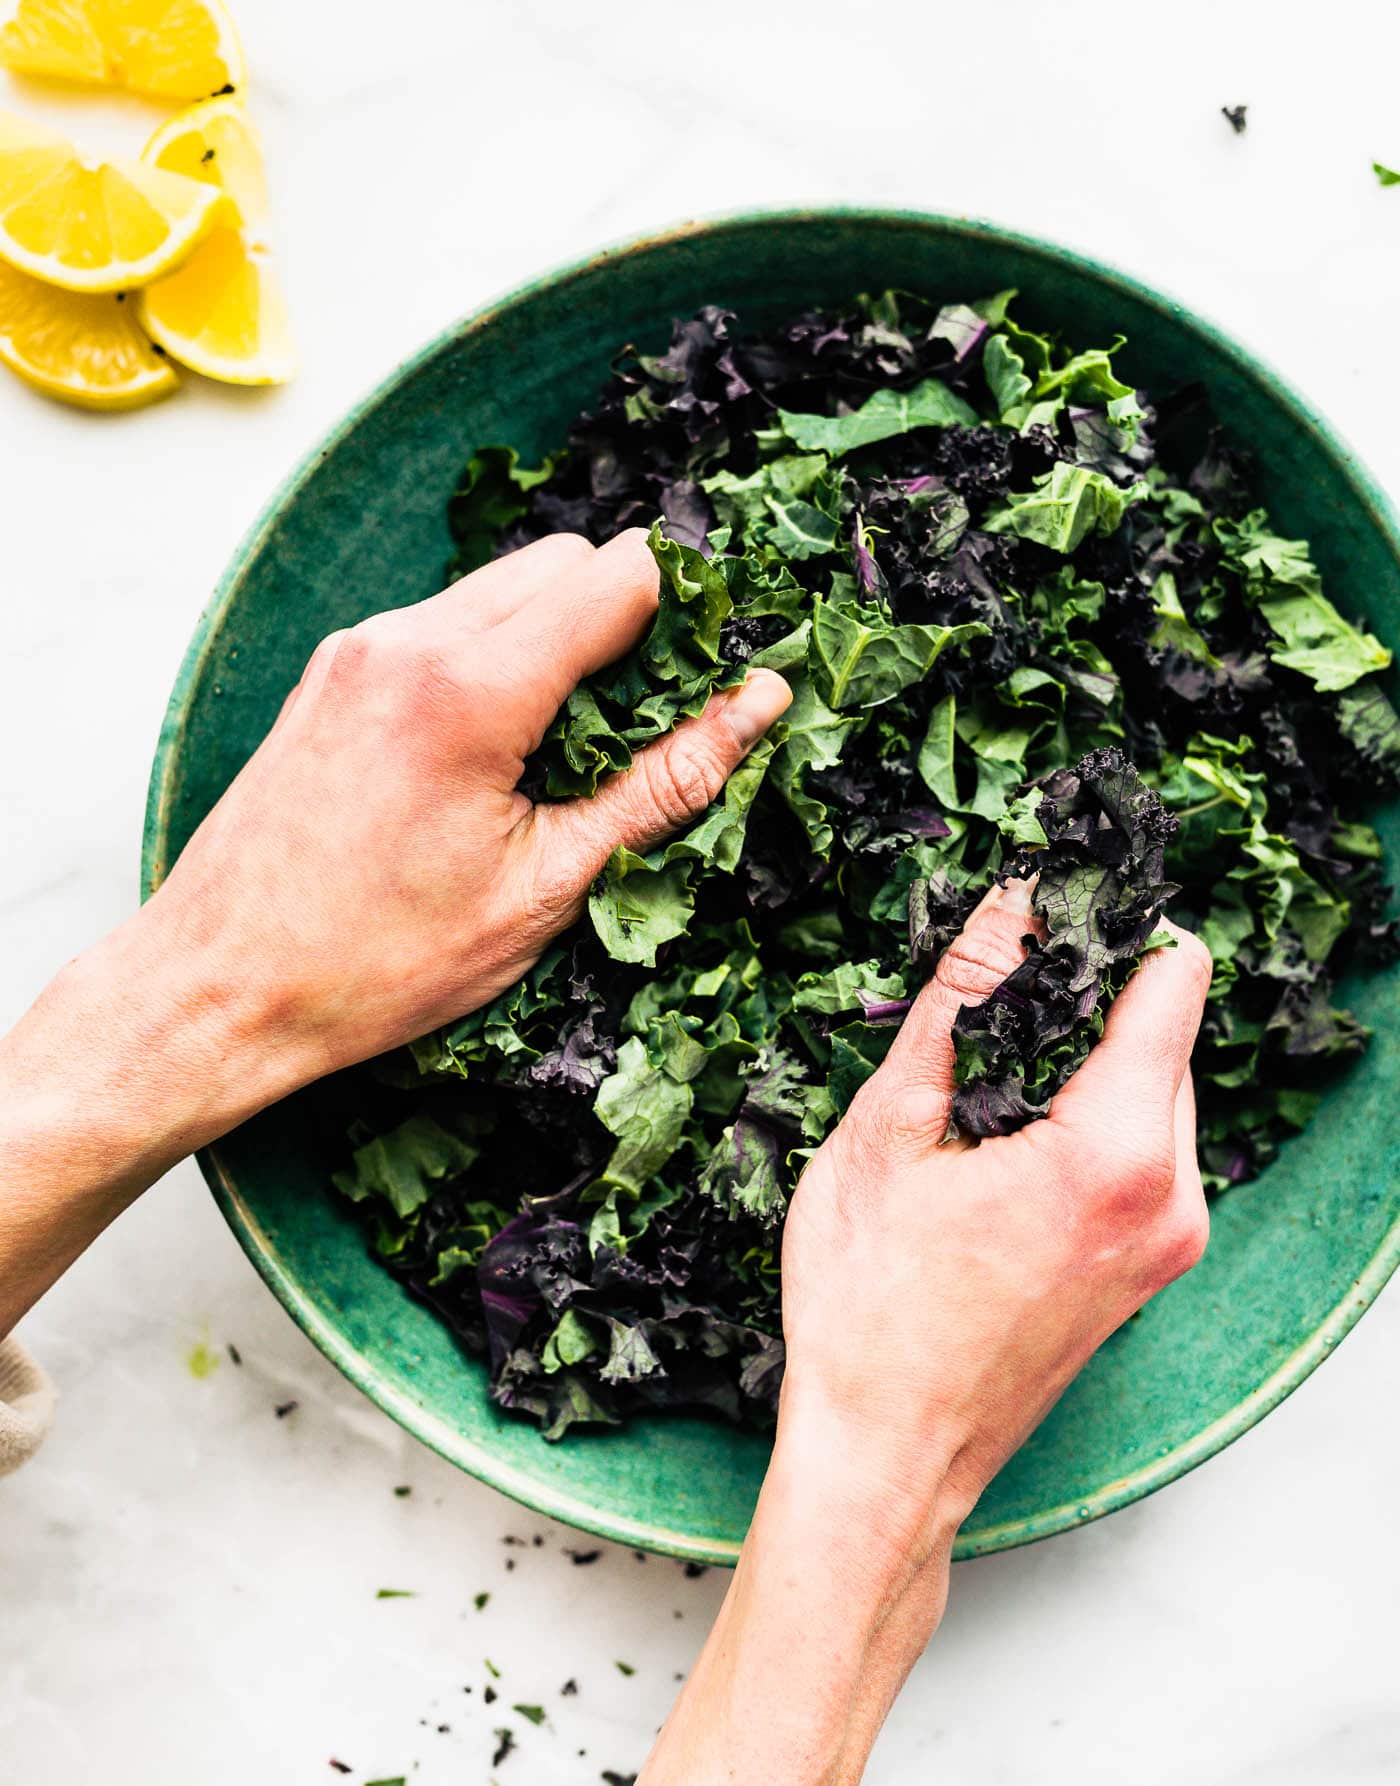 a woman's hands massaging kale in a blue bowl with lemon wedges off to the side